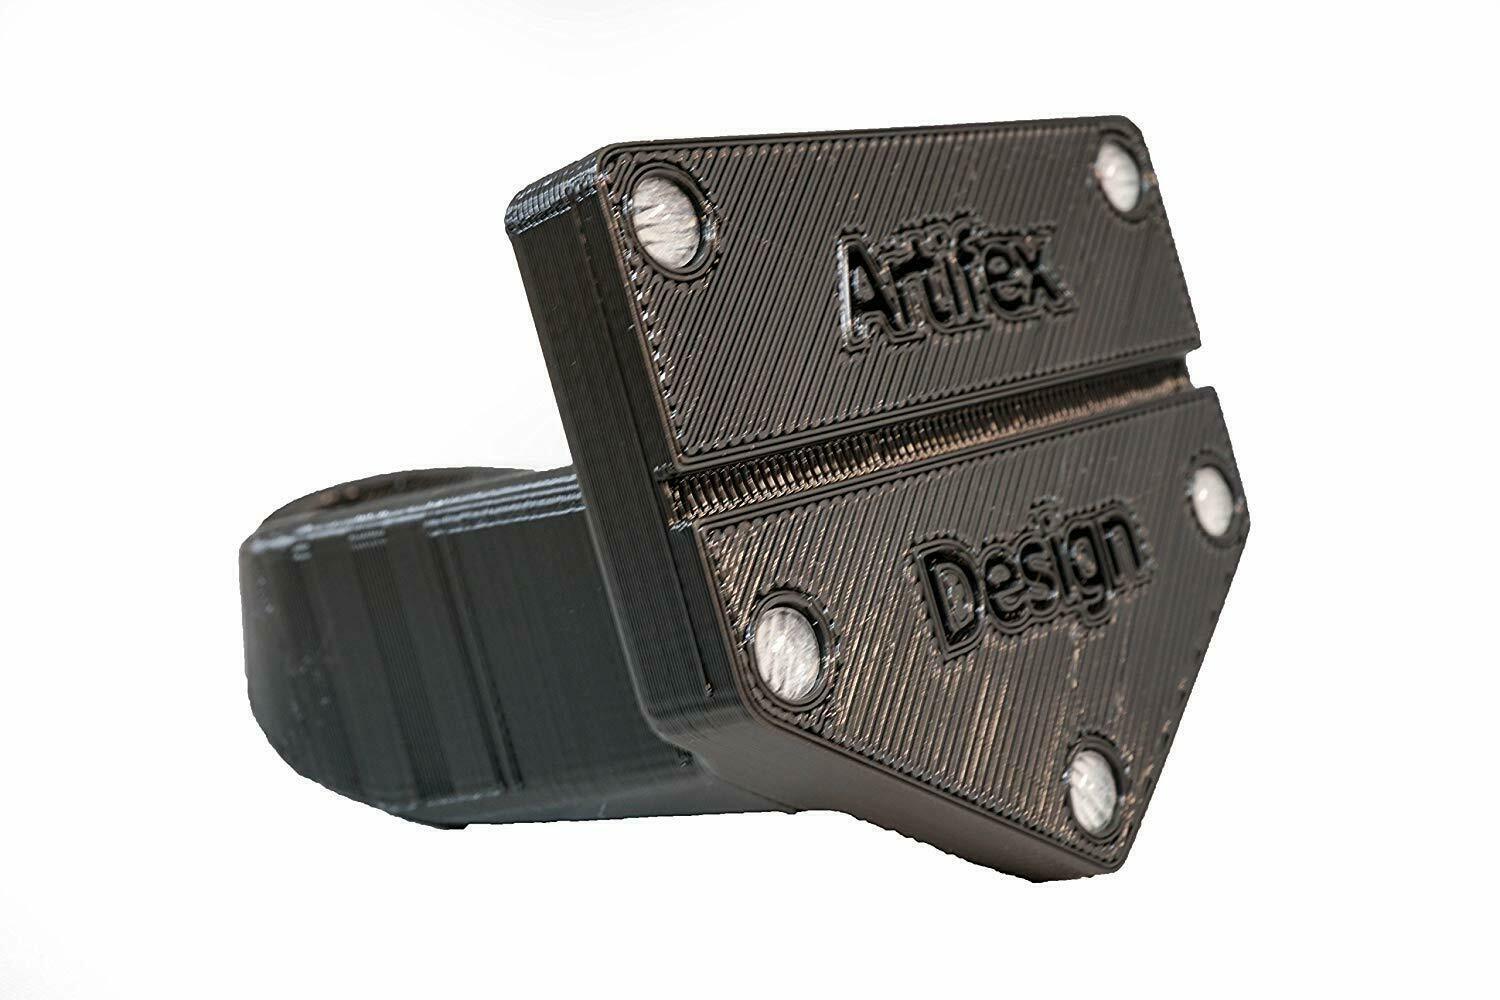 Artifex Design Stand Configured for 3rd Generation TAG Heuer Connected 2020 Phone Combo (Includes USB Cable) - Artifex Design 3D